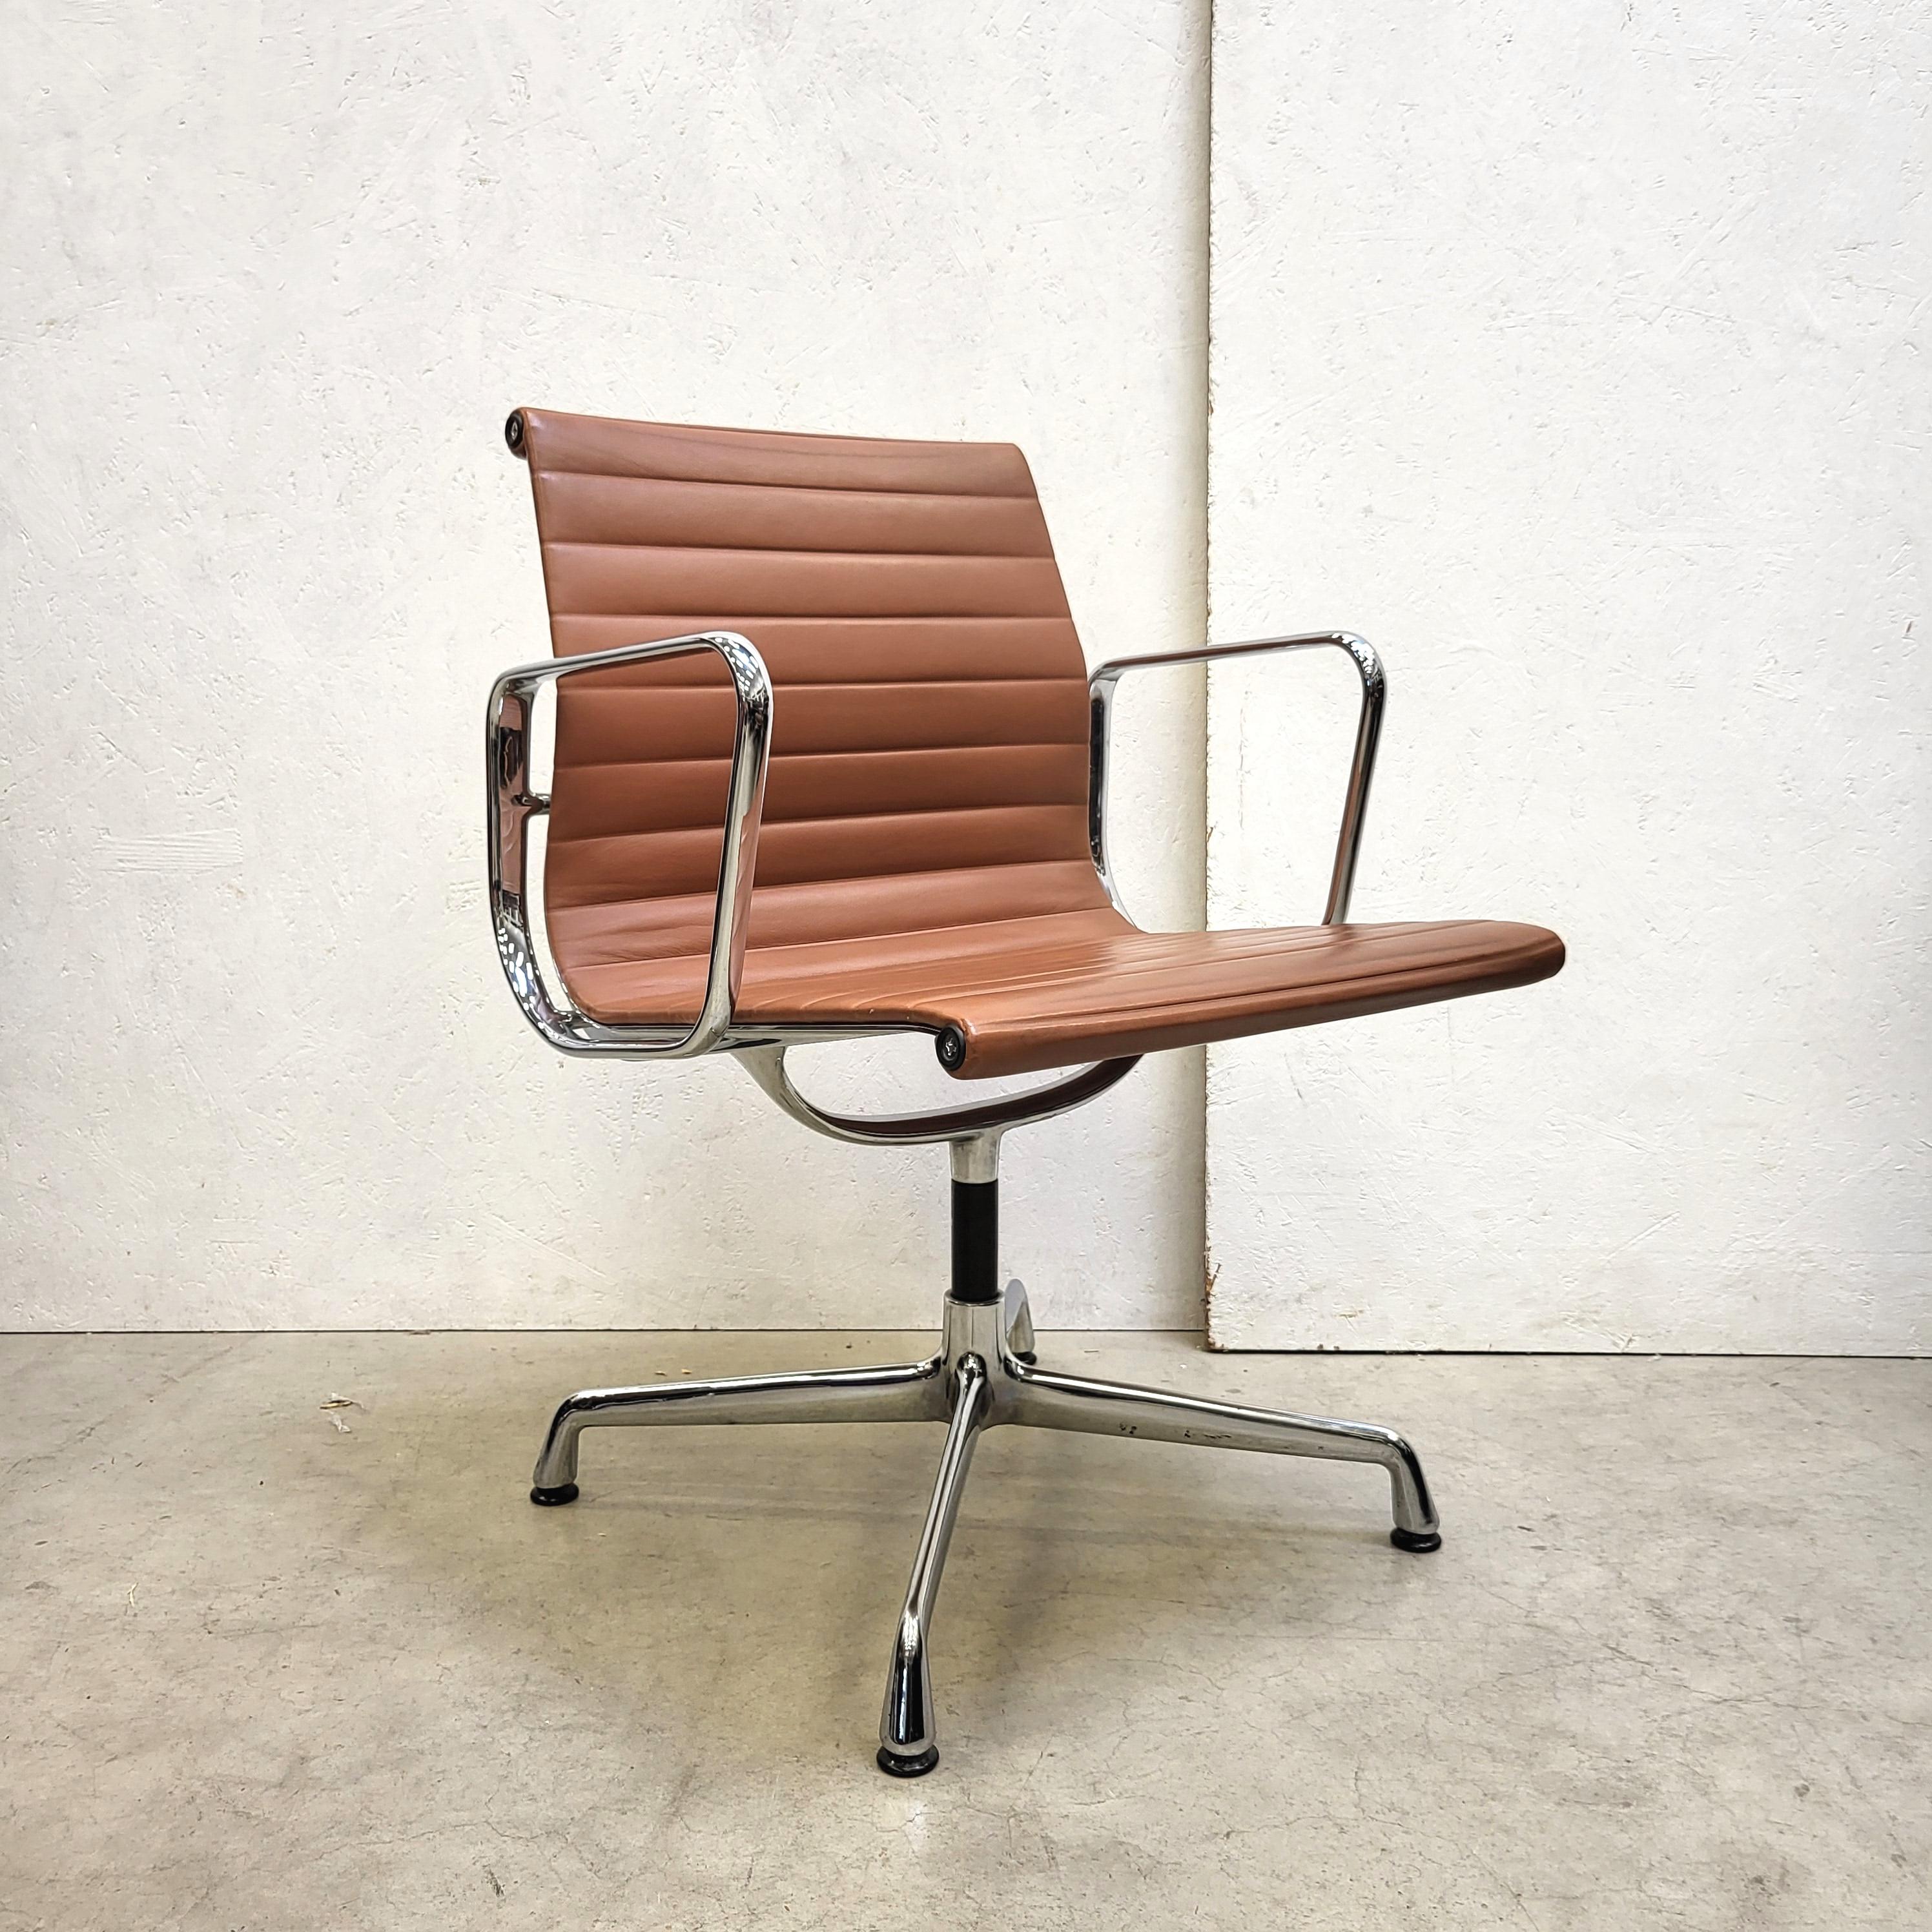 Rare set of 12 Cognac leather chairs model EA107 produced by Vitra. The chairs features a chromed aluminium frame and are all made between 1994 - 1998.

It is the premium edition which includes that the back is also covered with leather, Vitra